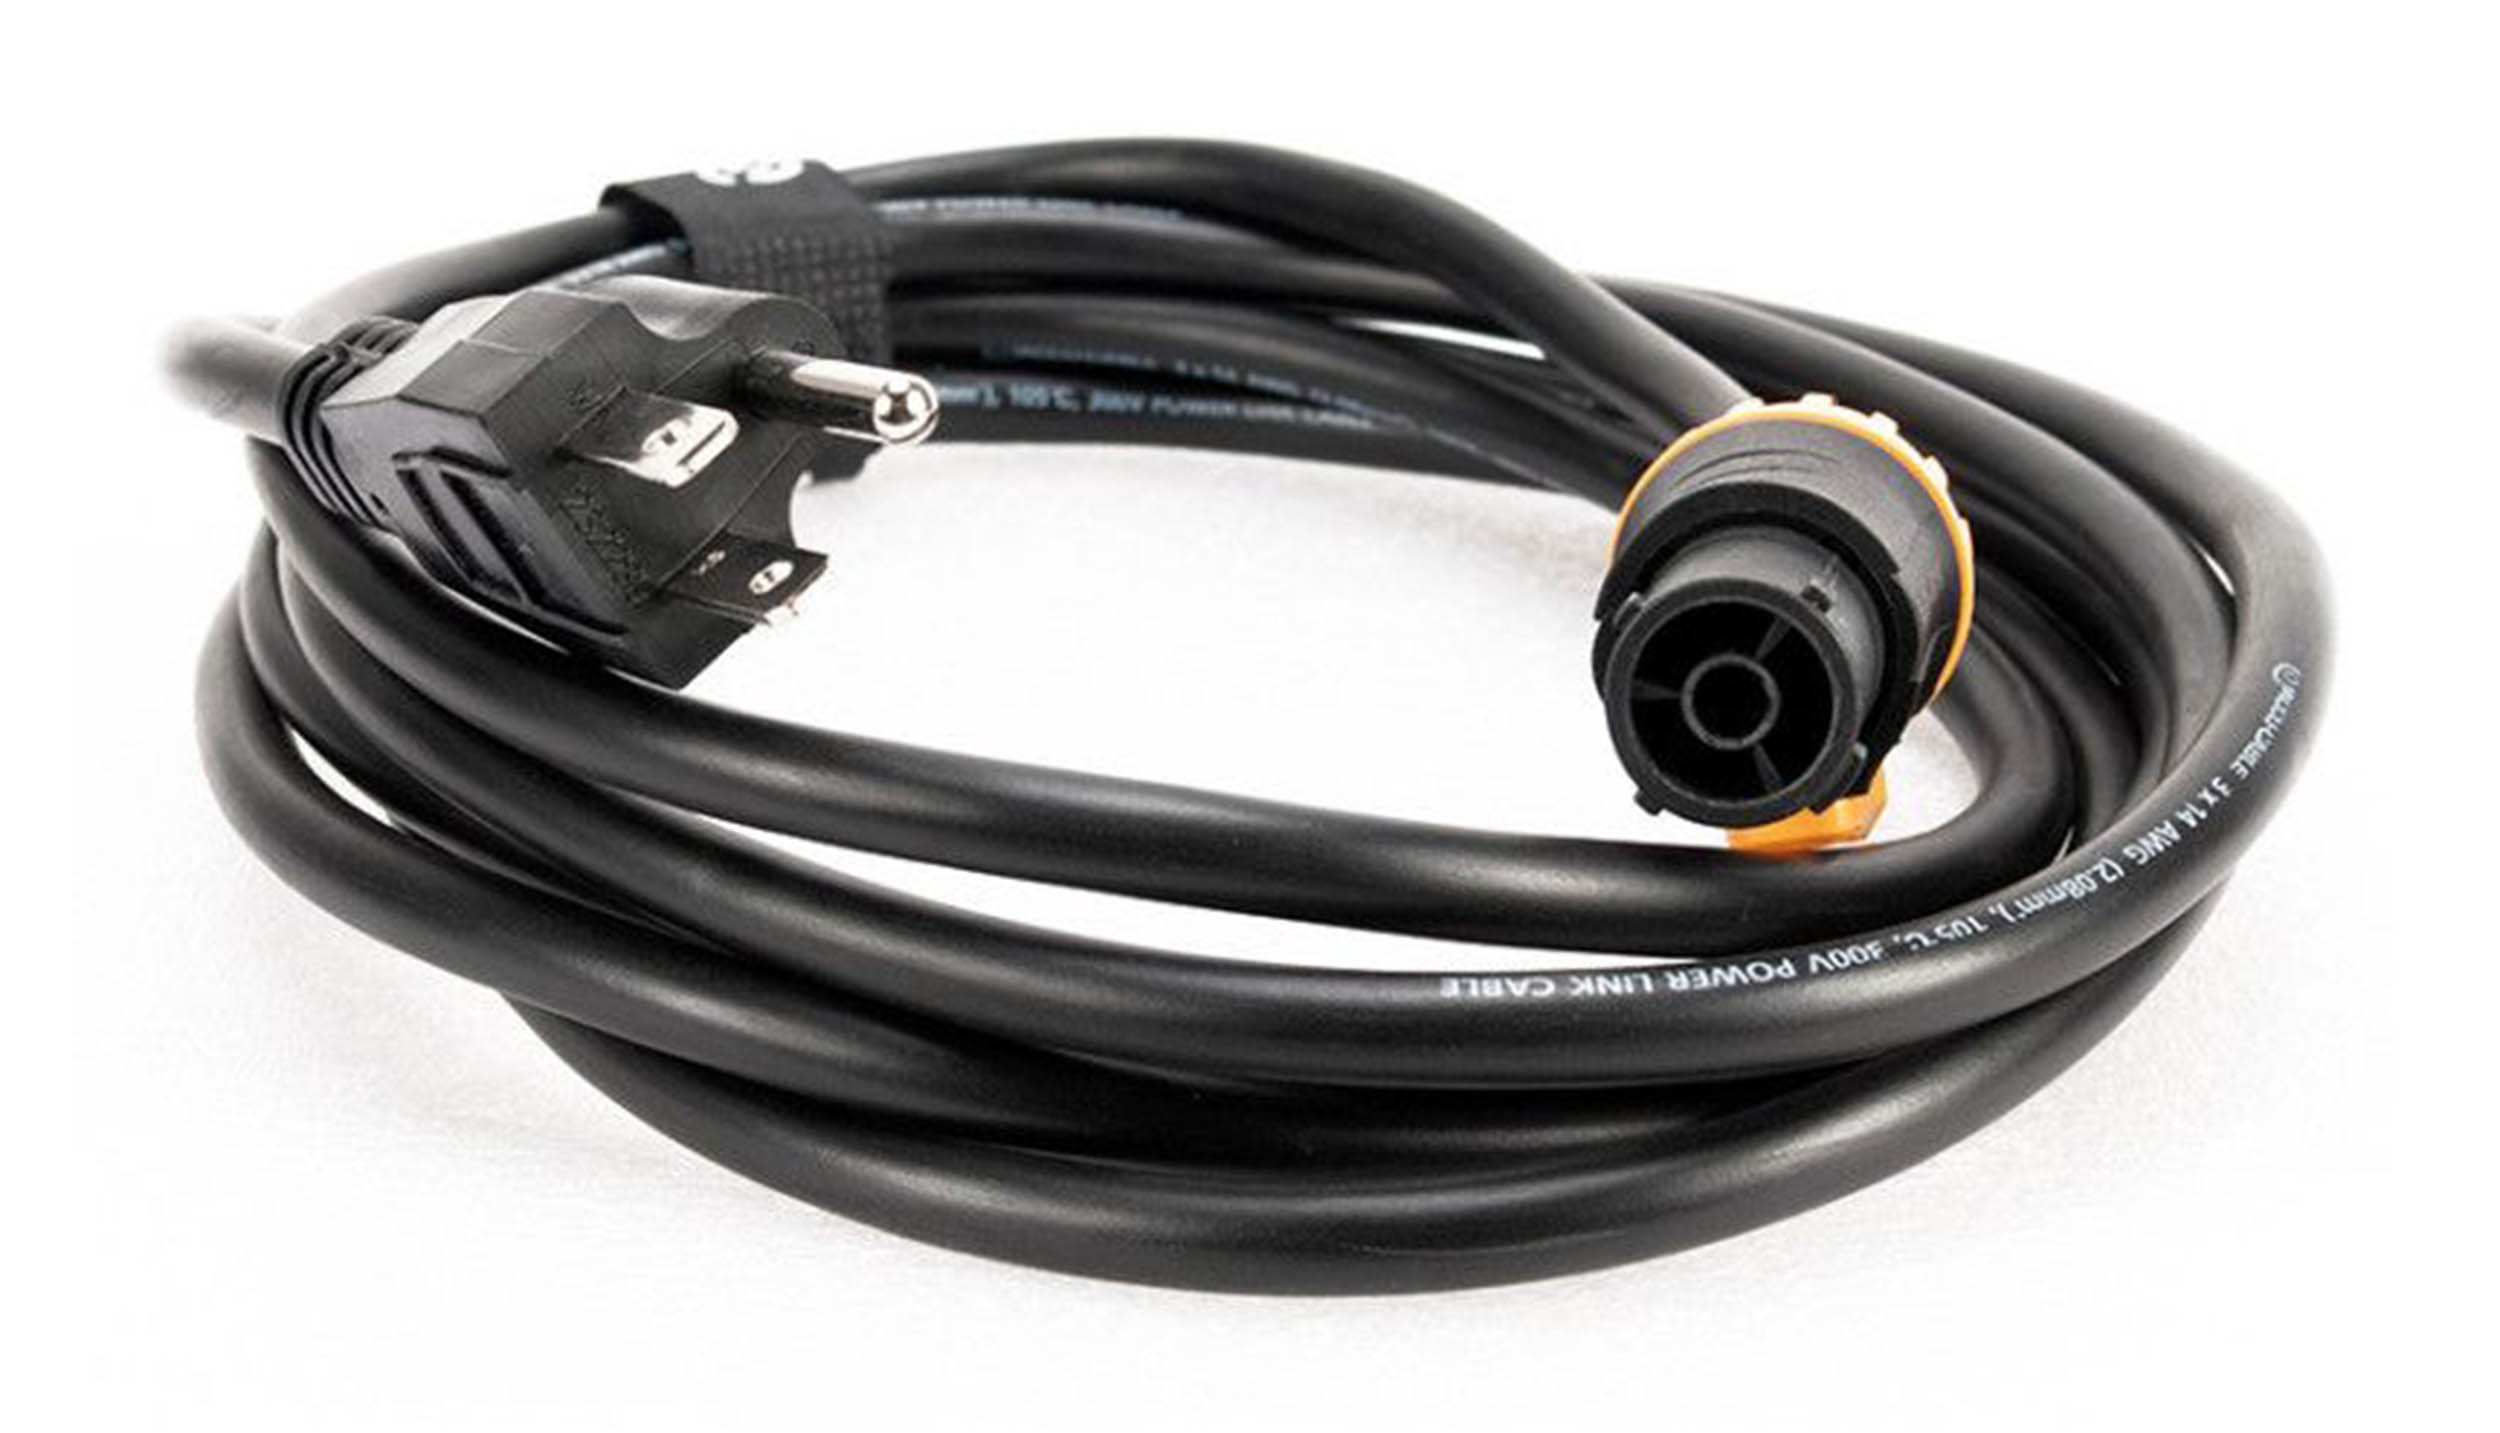 ADJ SIP1MPC10, IP65 Power Link to Edison 3-Prong Power Cable - 10 Ft by ADJ